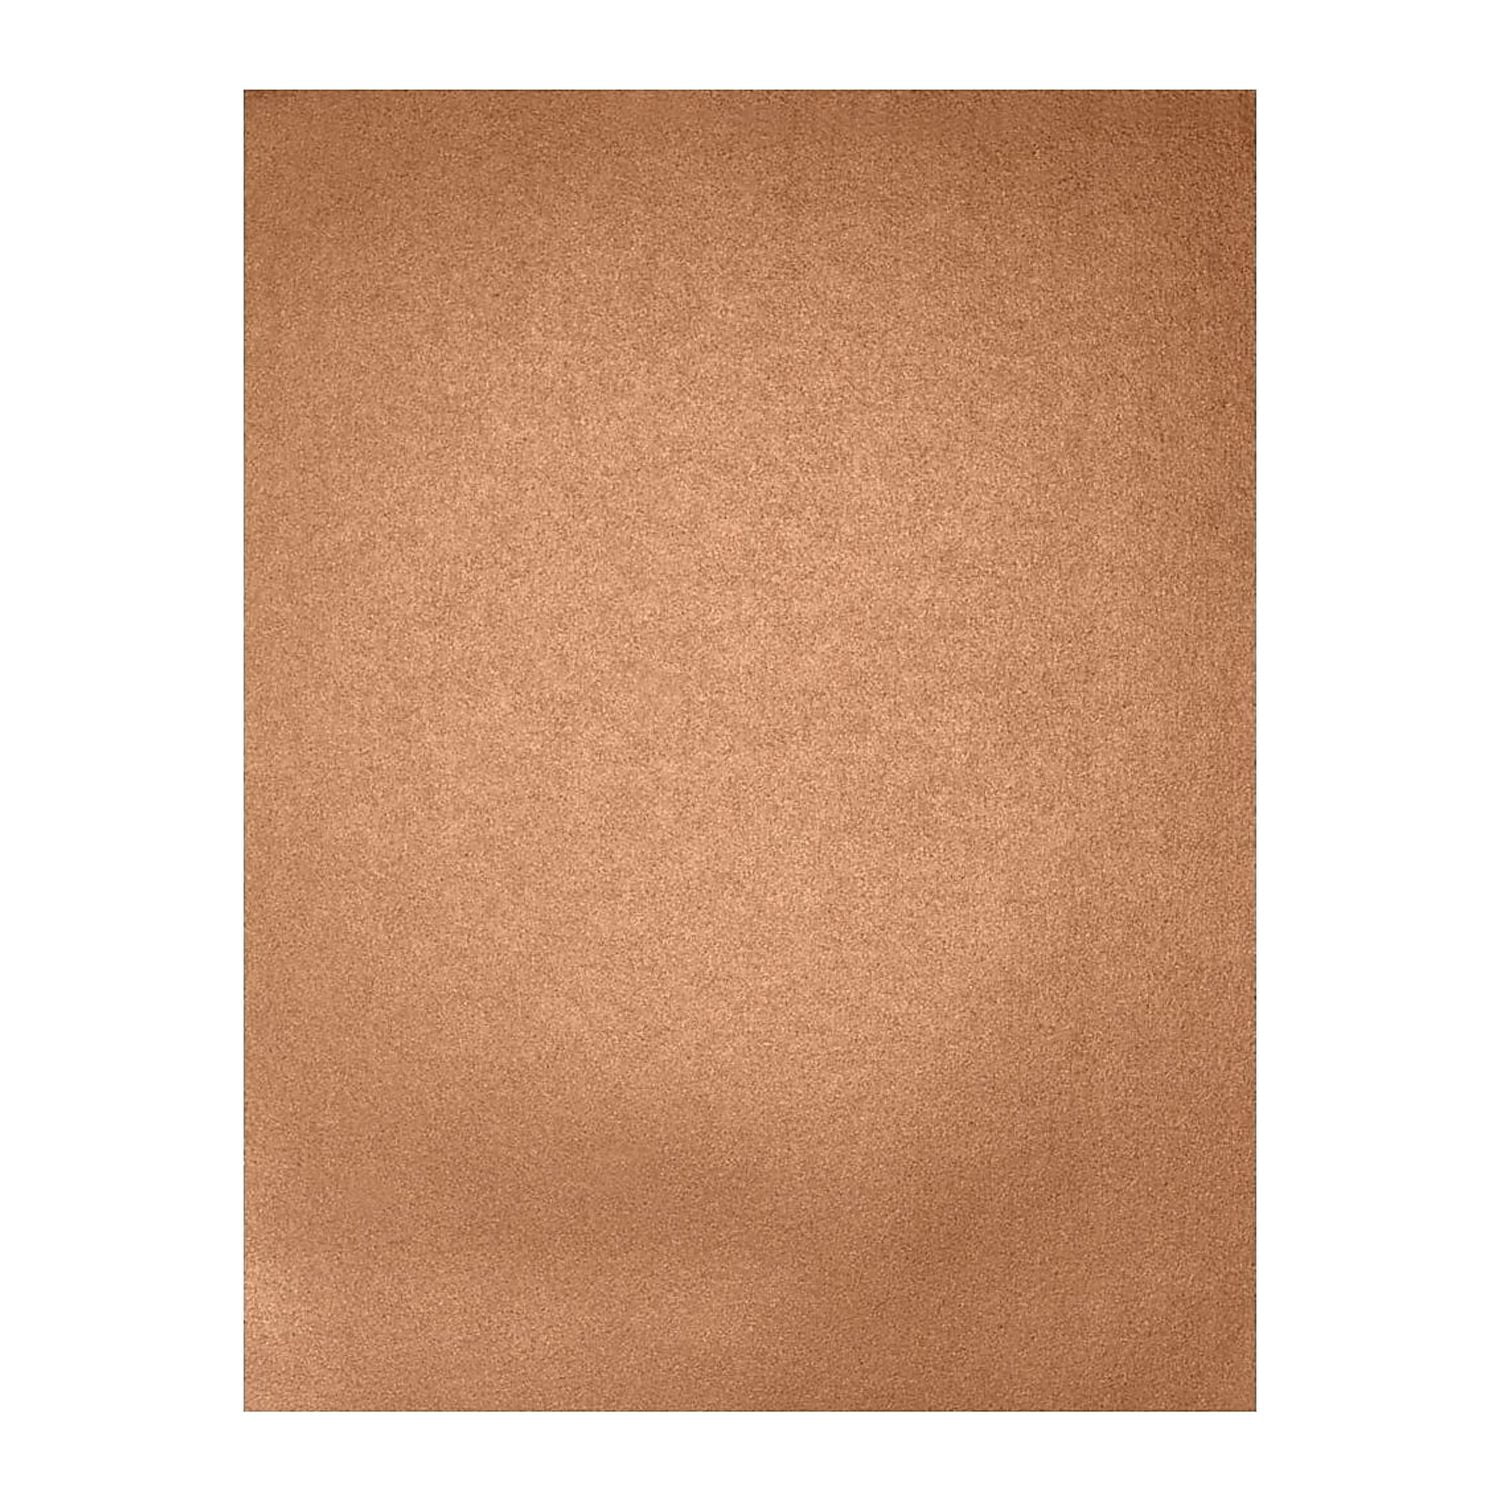 Champagne Glitter 8.5 x 11 Cardstock Paper by Recollections™ 24 Sheets